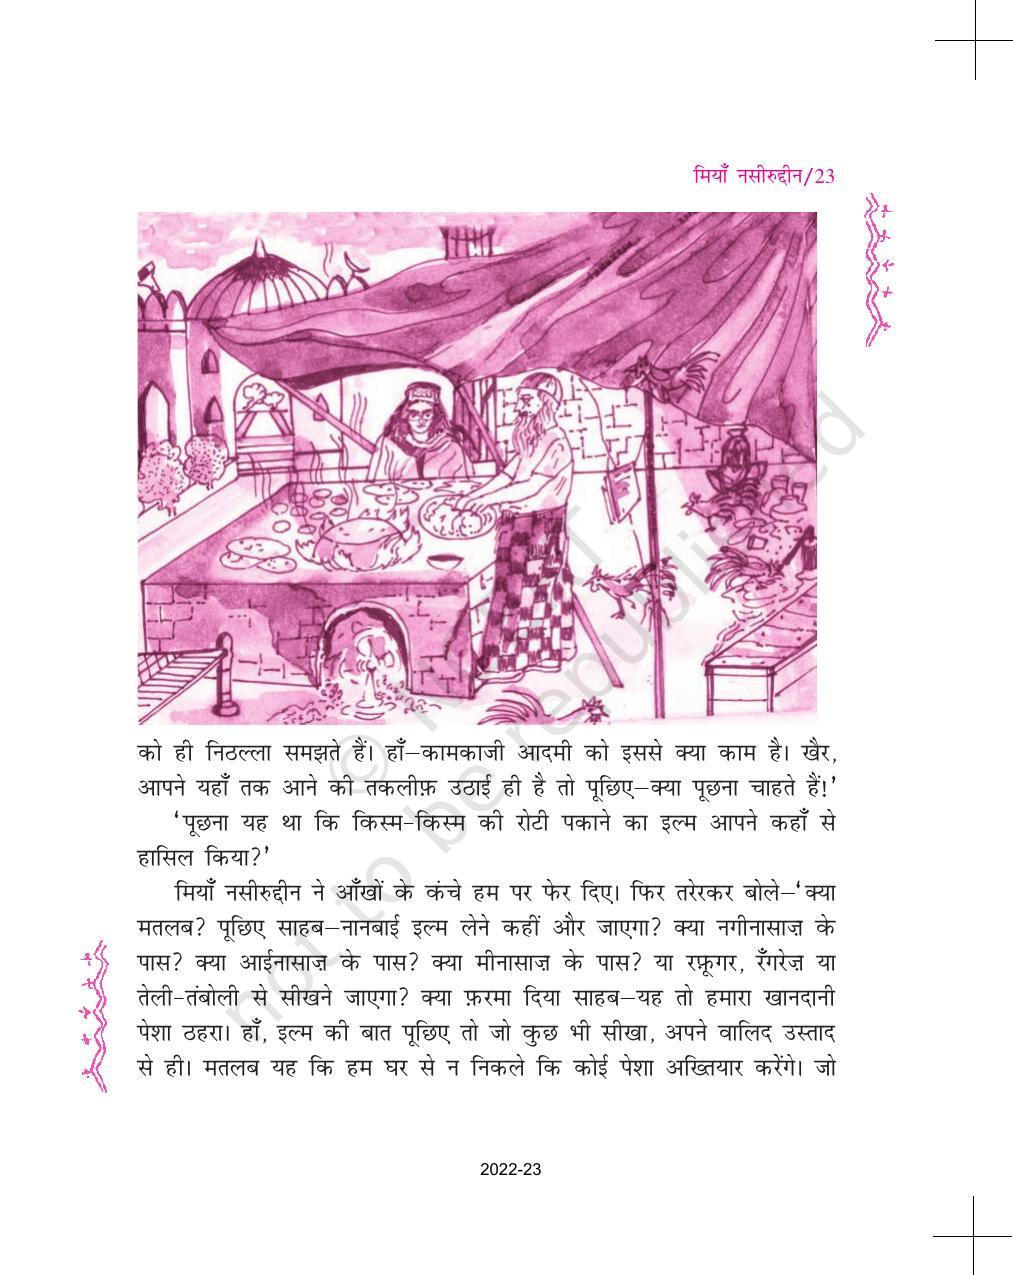 NCERT Book for Class 11 Hindi Aroh Chapter 2 मियाँ नसीरुद्दीन - Page 4